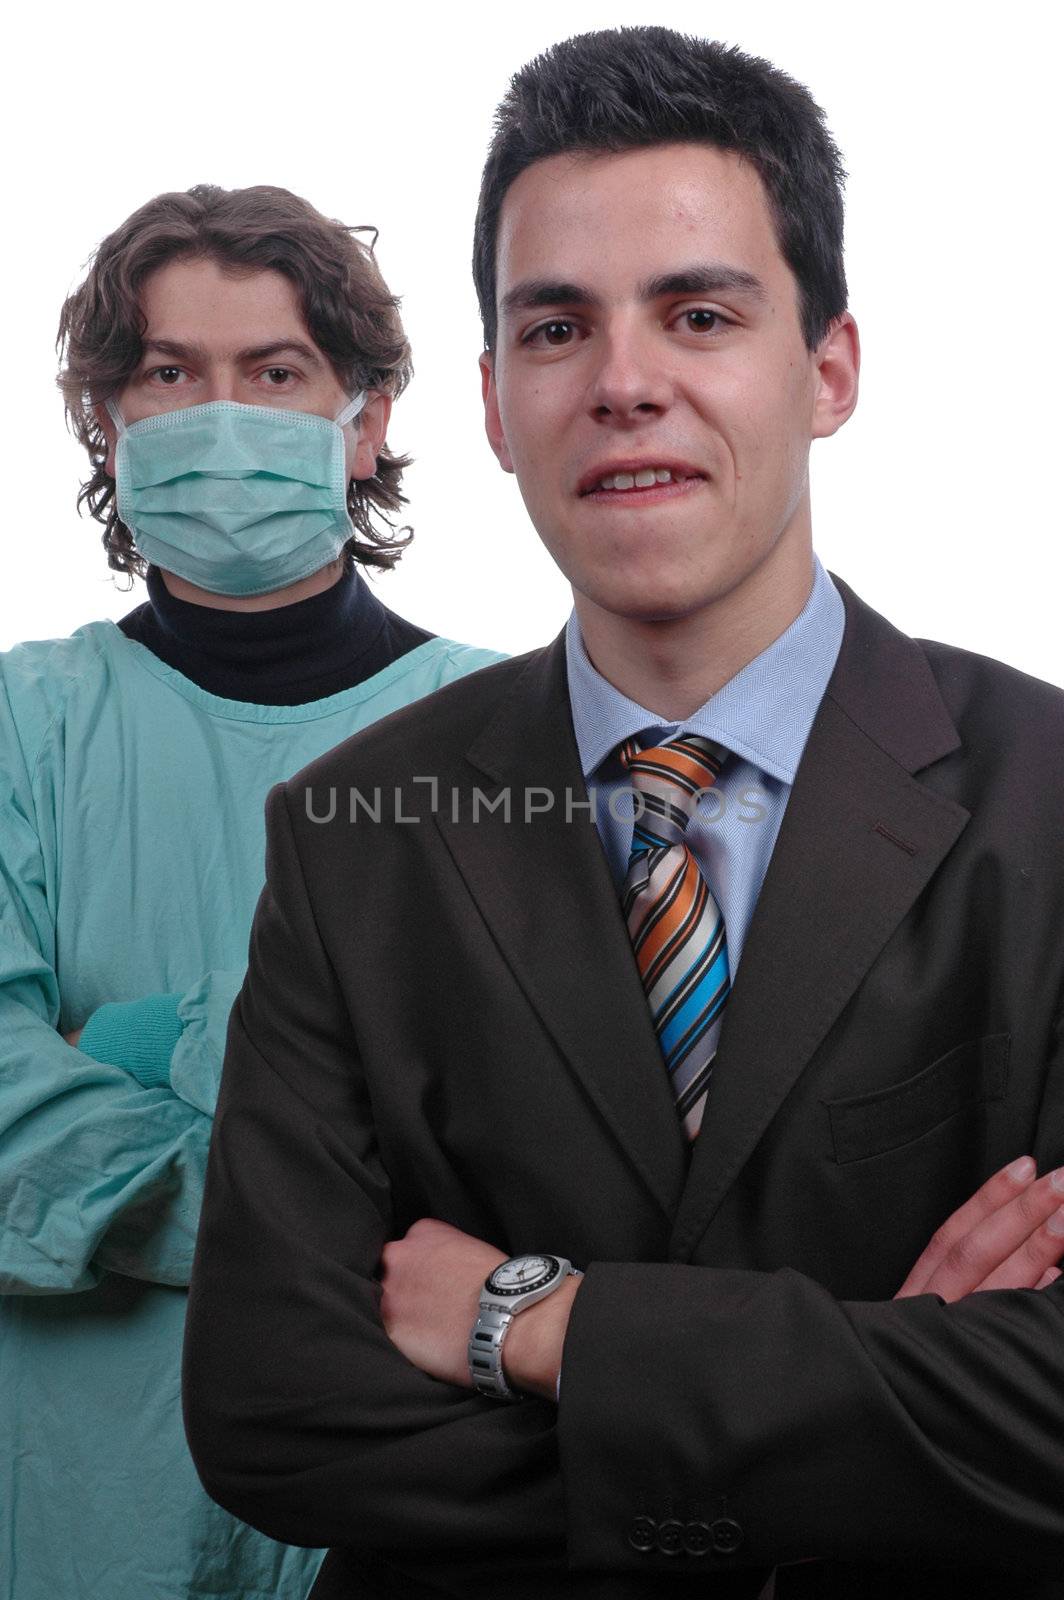 young doctor and businessman portrait over white background